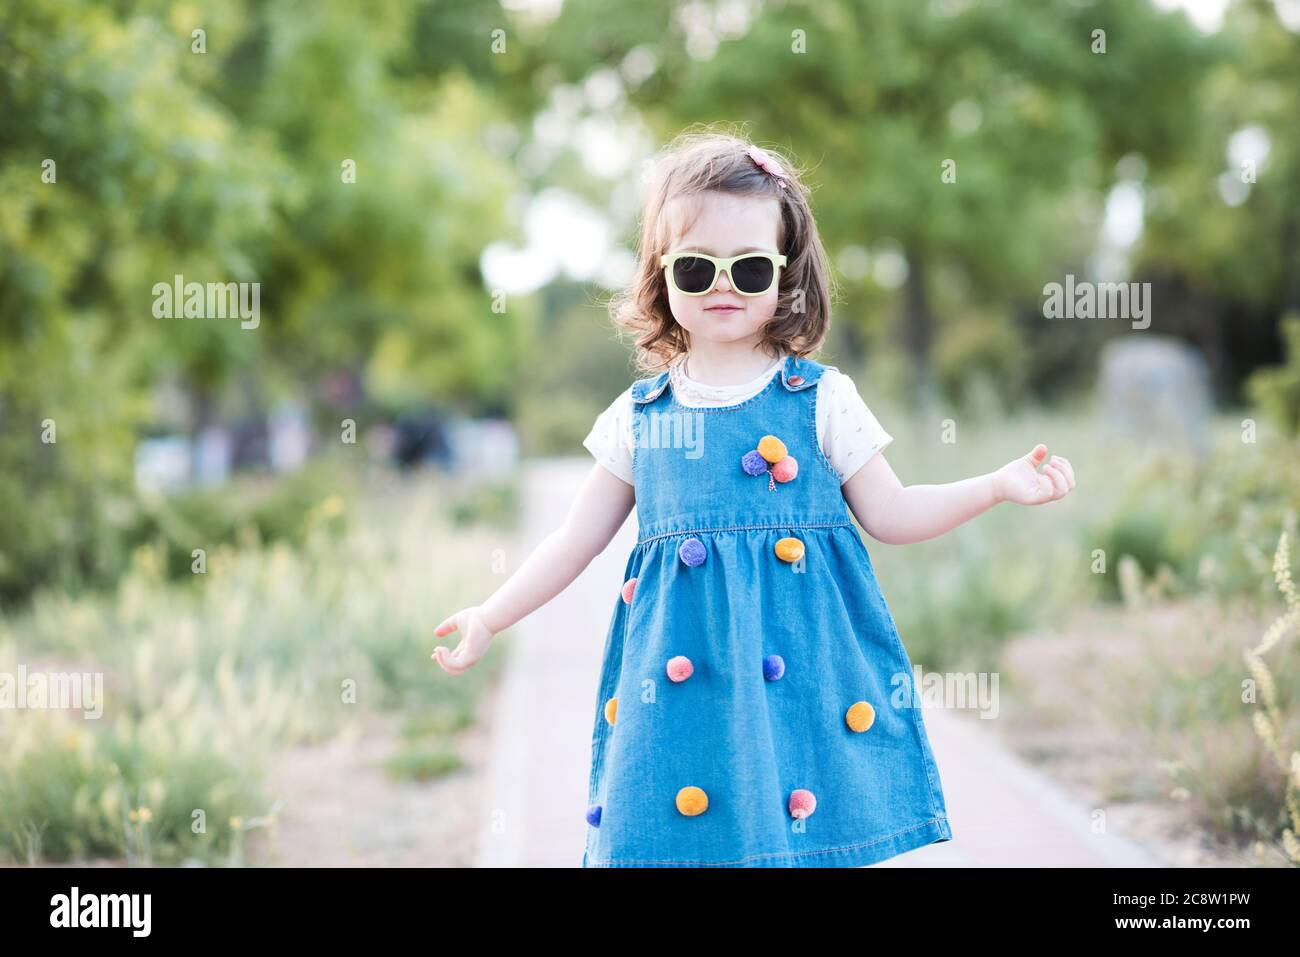 Stylish baby girl 2-3 year old wearing denim dress and sun glasses outdoors in park. Looking at camera. Summer season. Stock Photo